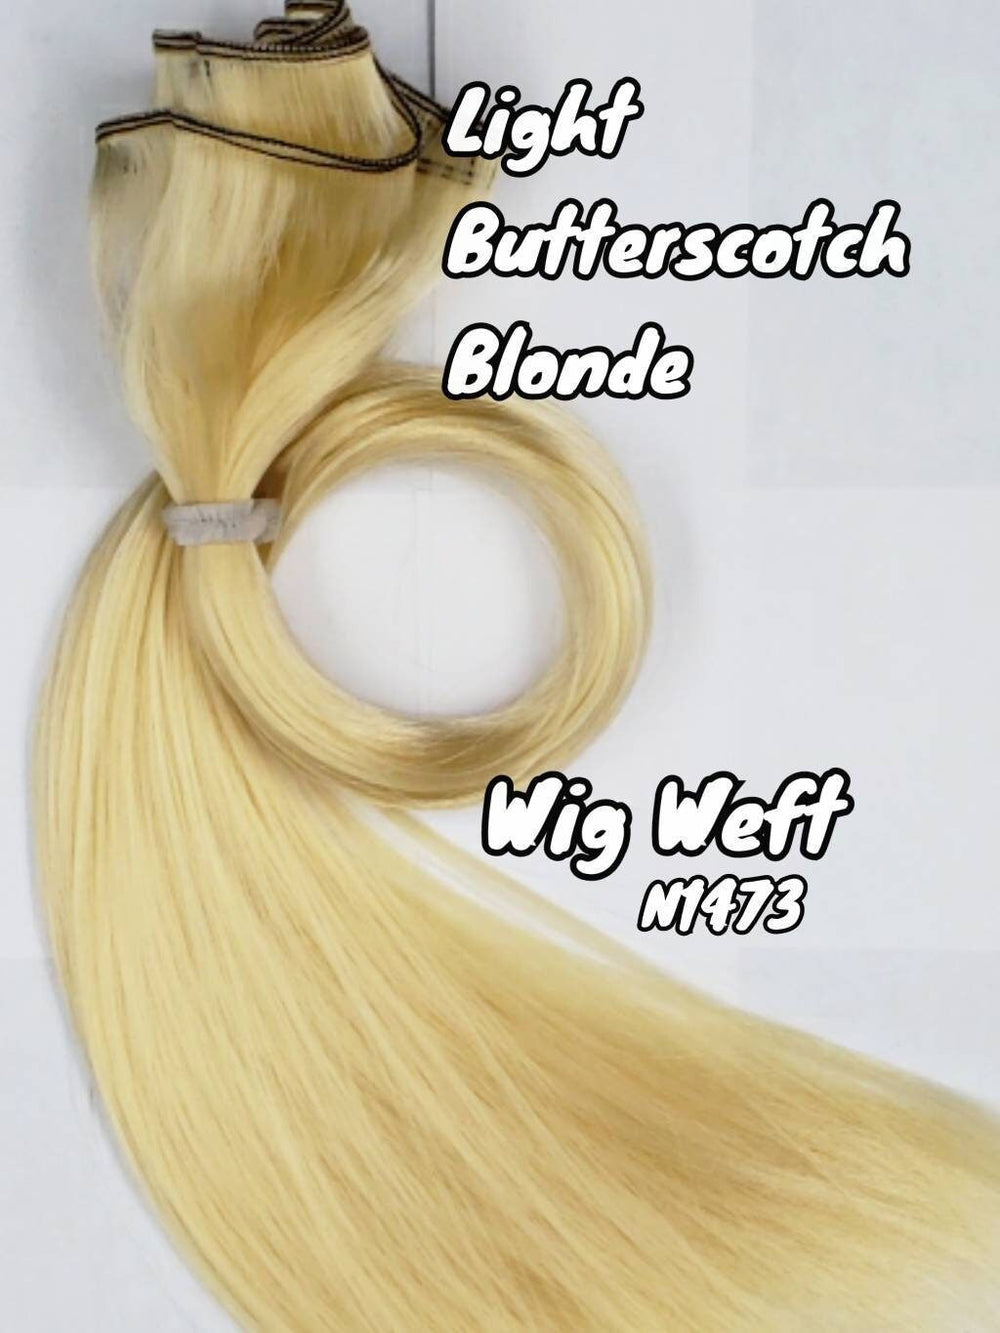 DG-HQ™ Wig Weft Nylon Light Butterscotch Blonde N1473 Nylon Weft 30"Wx20"L Doll Hair for Making Fashion Doll Wigs Standard Temperature